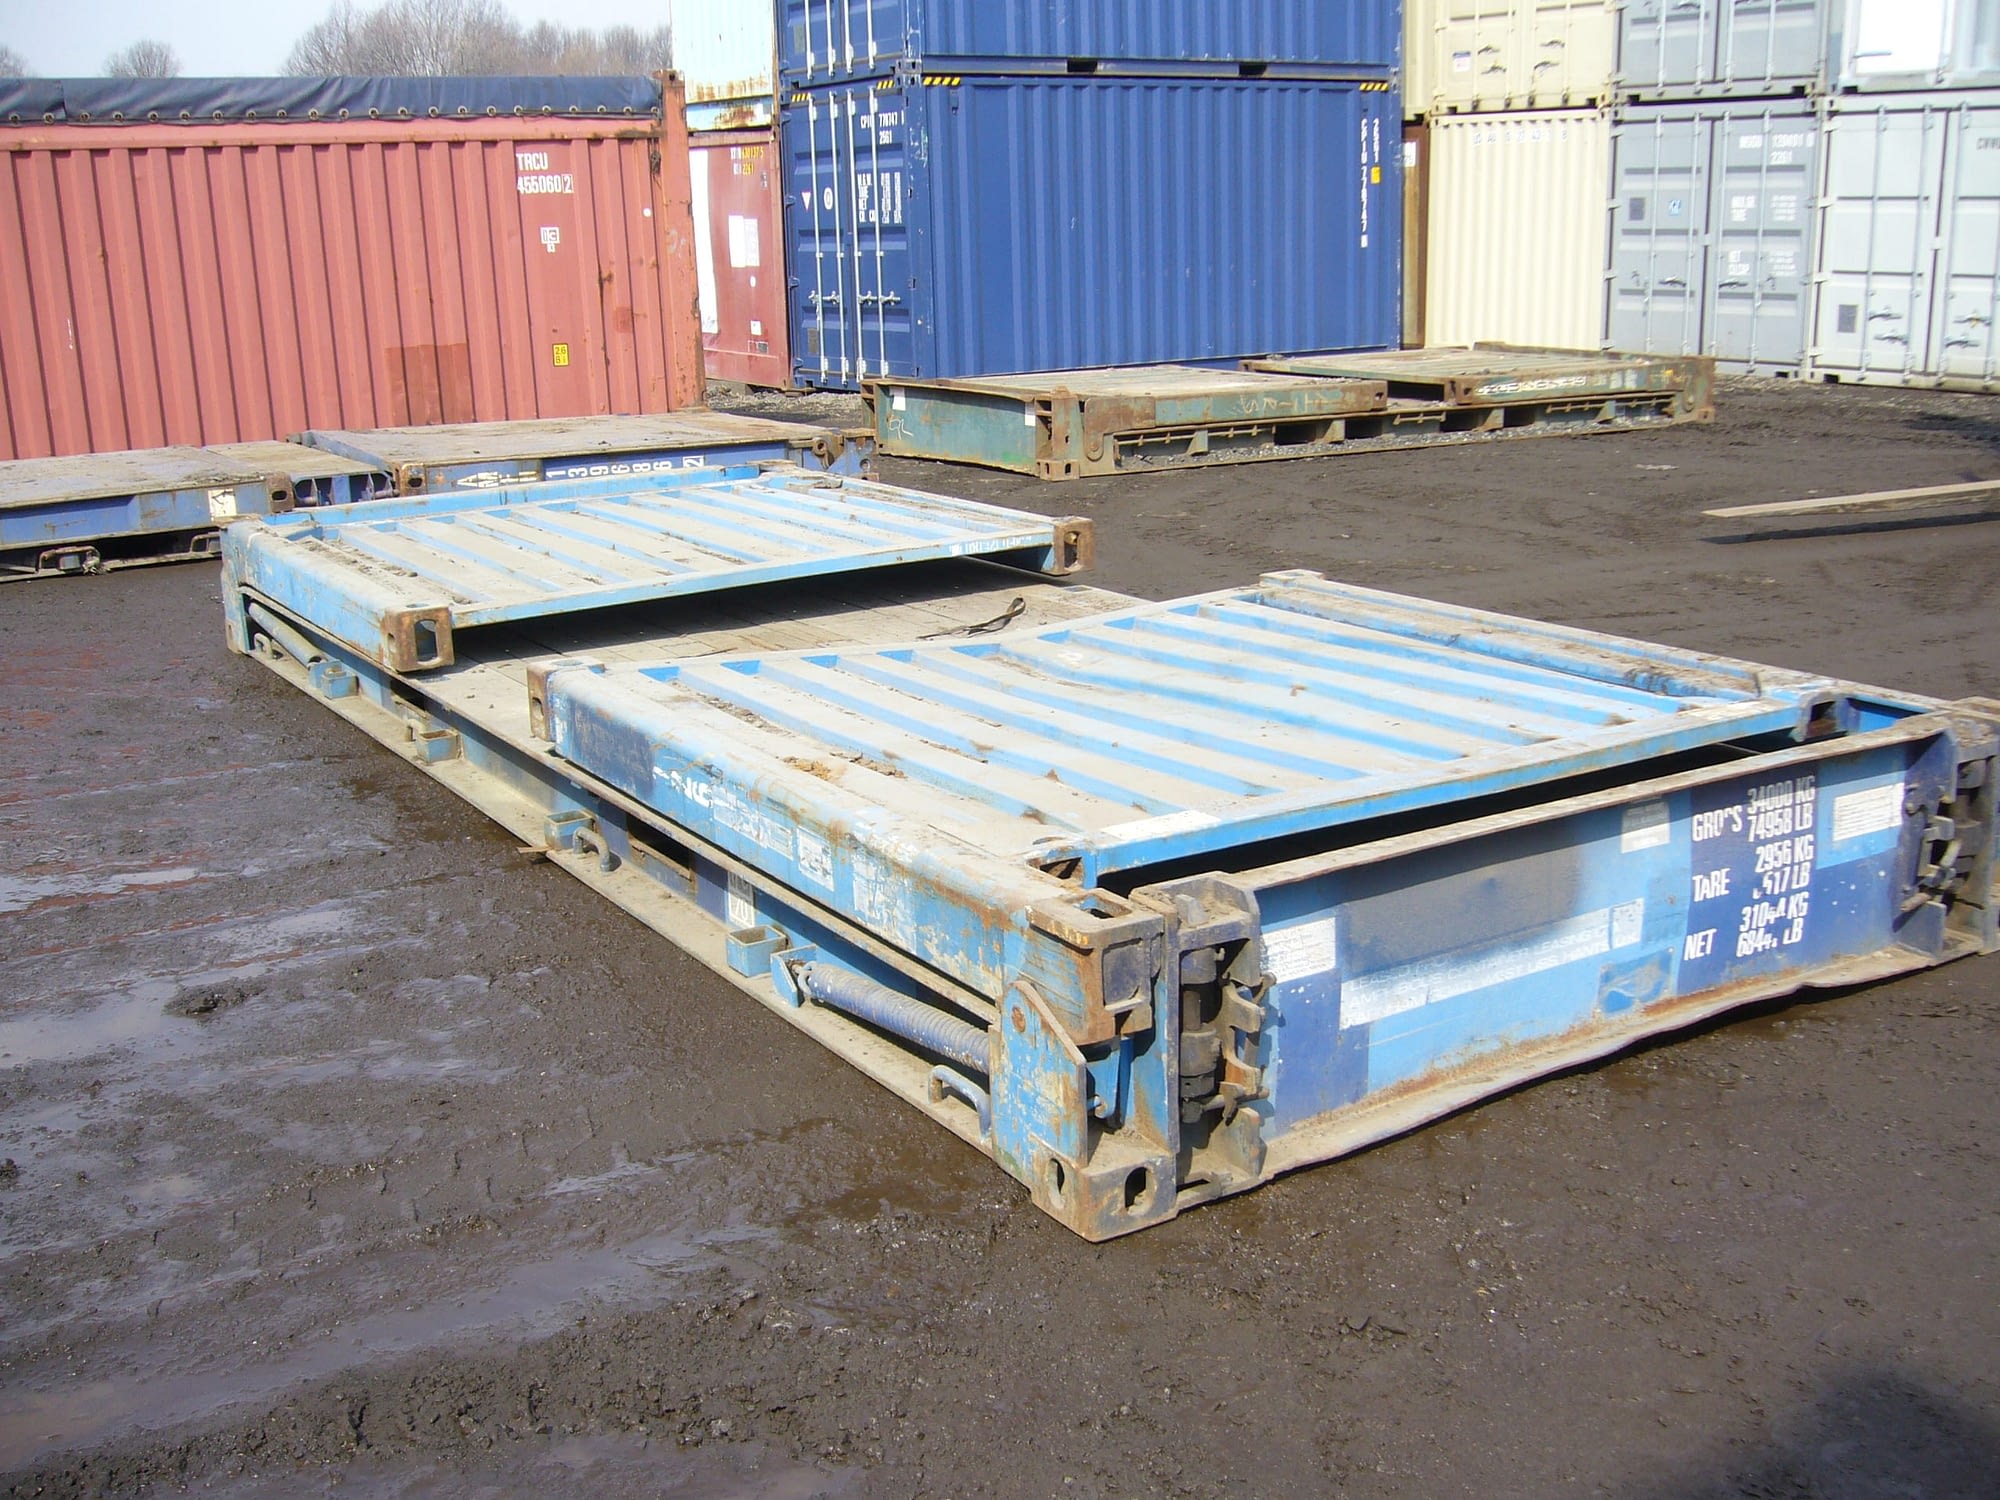 TRS stocks 20ft collapsible and flixed end flatracks and platforms